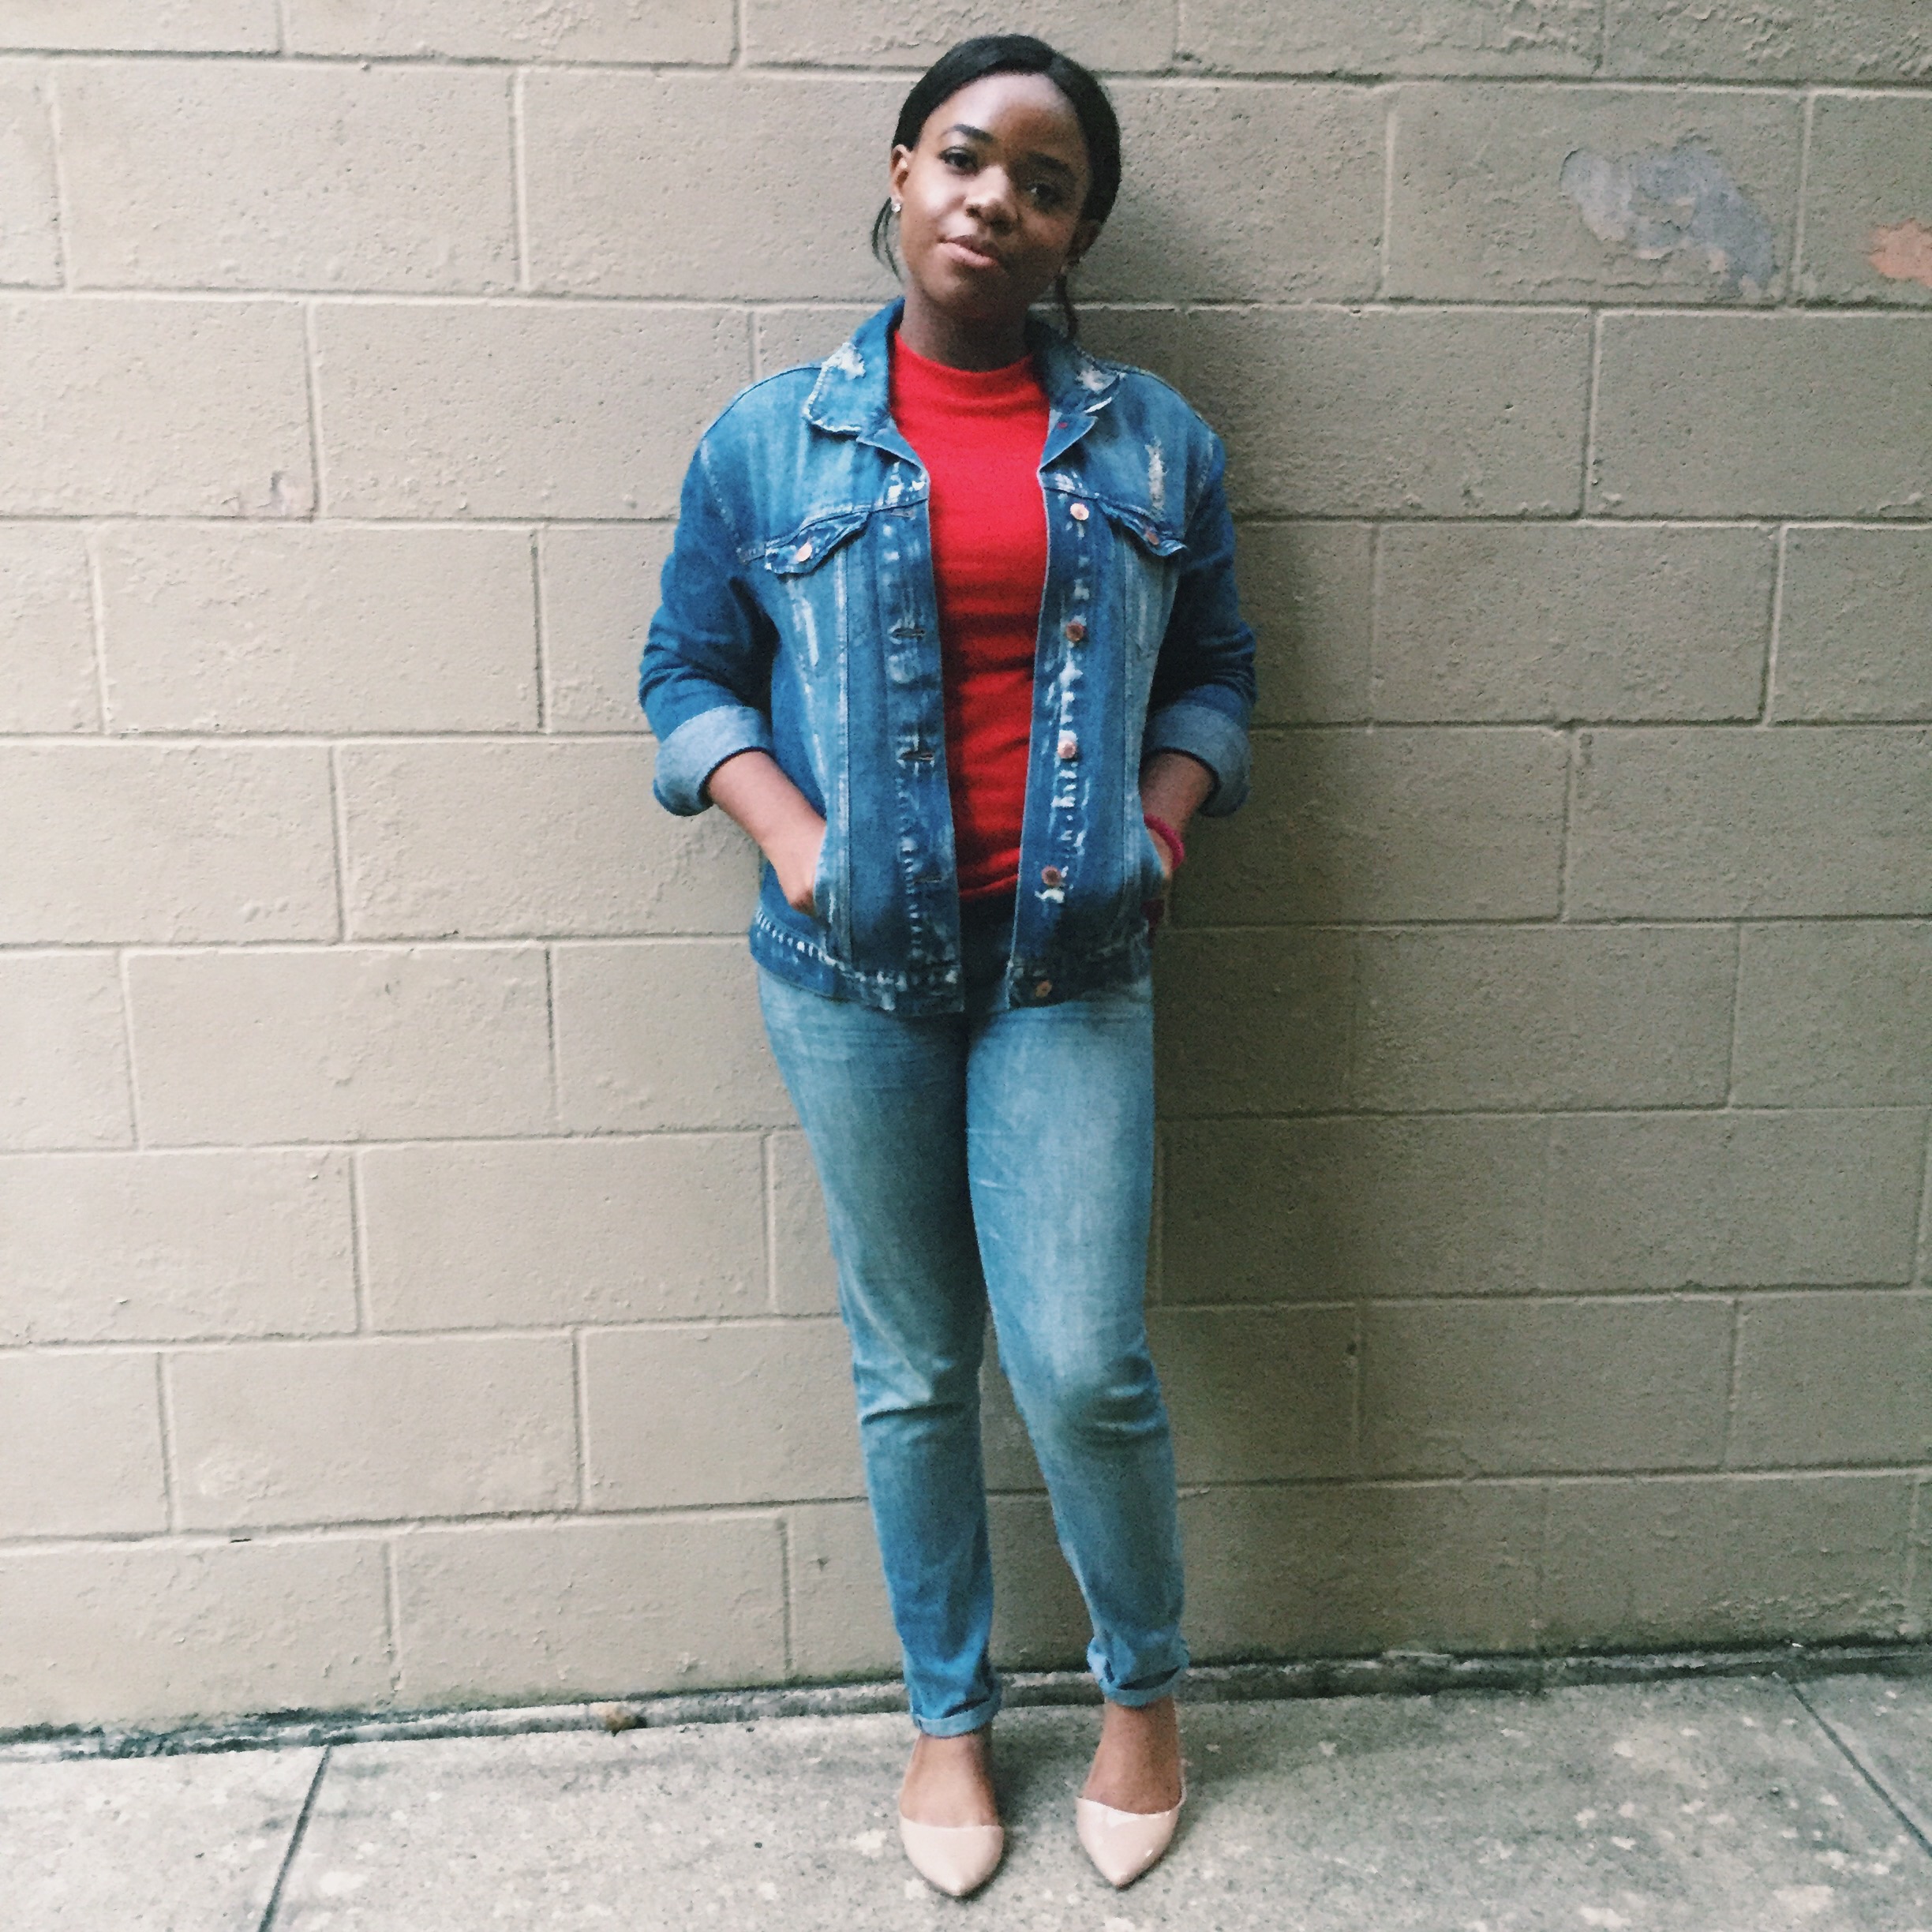 Pacsun Denim Jacket, Forever 21 jeans, Forever 21 ribbed top, Forever 21 flats